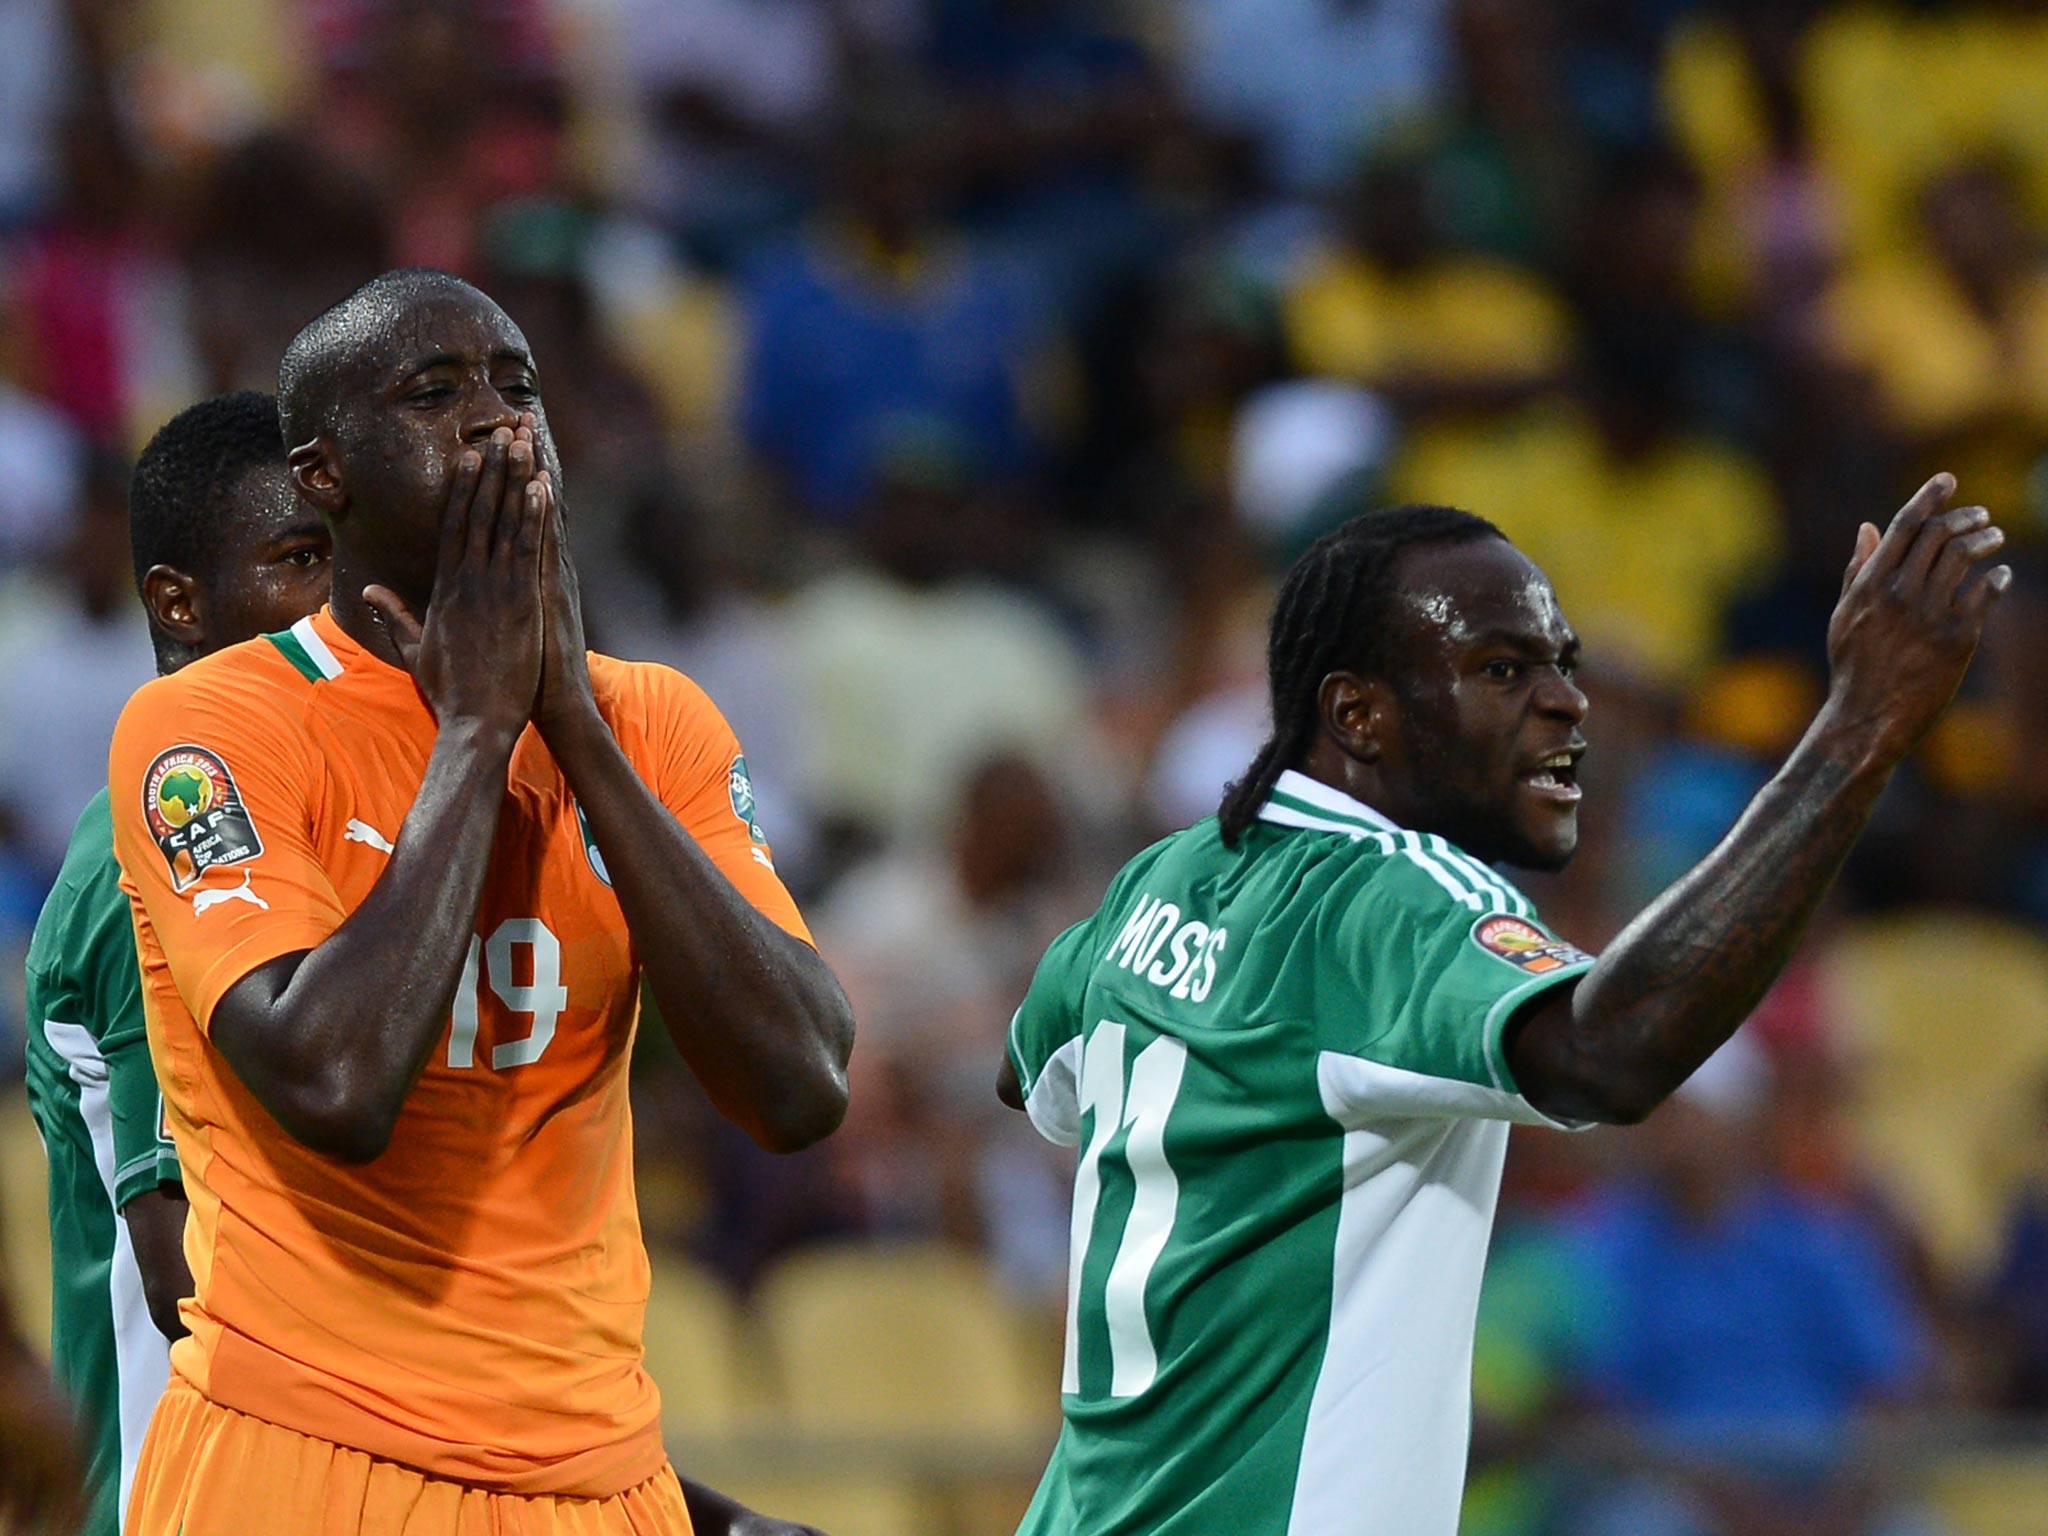 Ivory Coast midfielder Yaya Toure reacts after missing a goal opportunity during defeat in the African Cup of Nation quarter-final against Nigeria